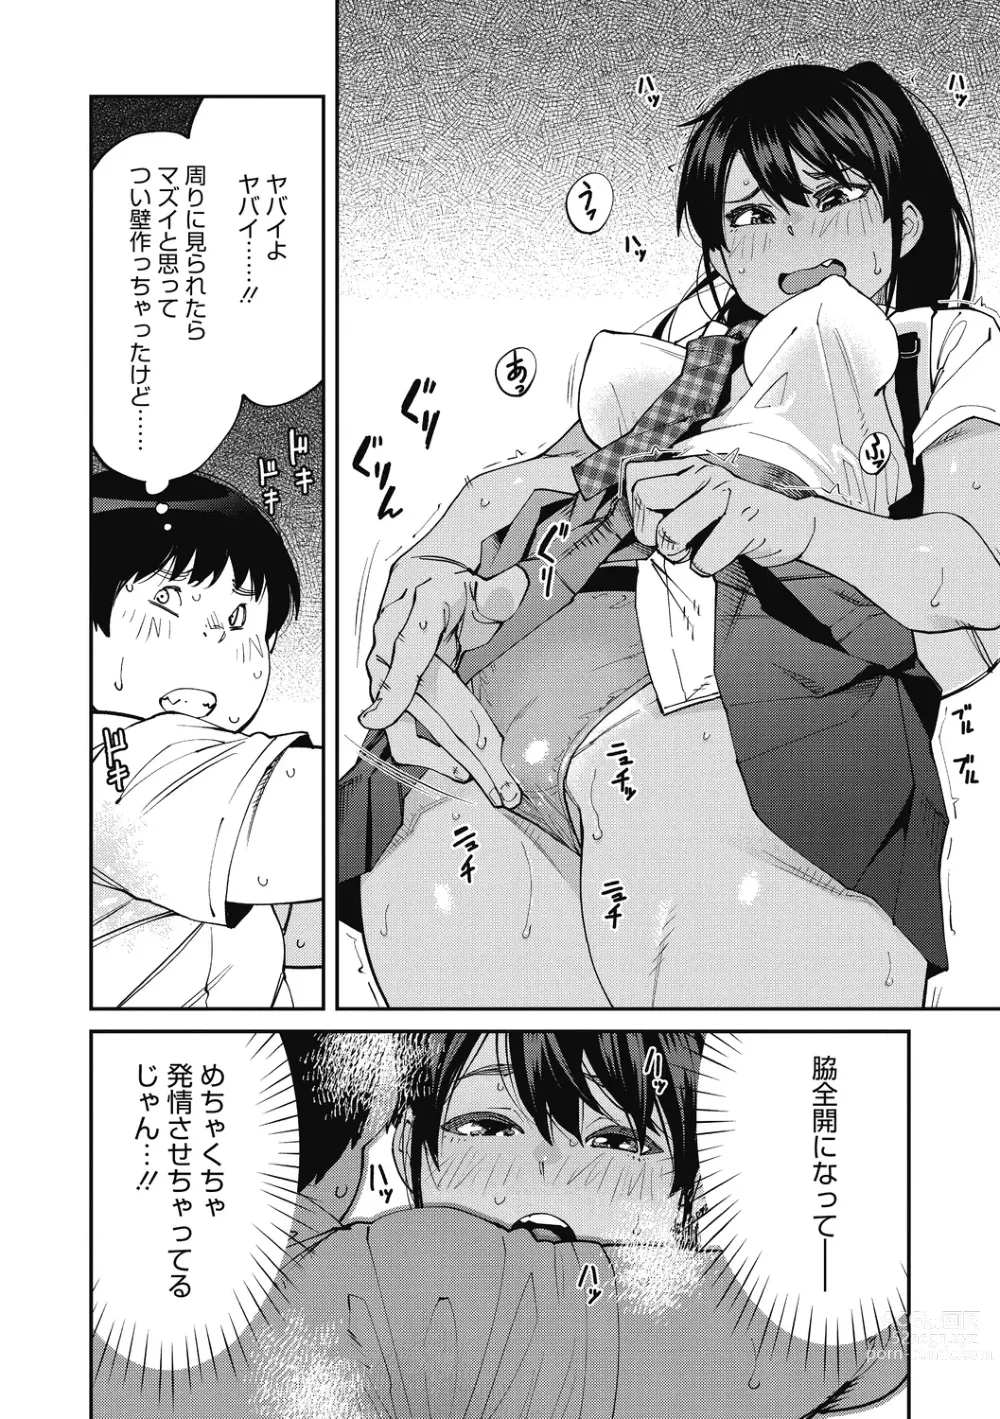 Page 28 of manga Sweet and Hot